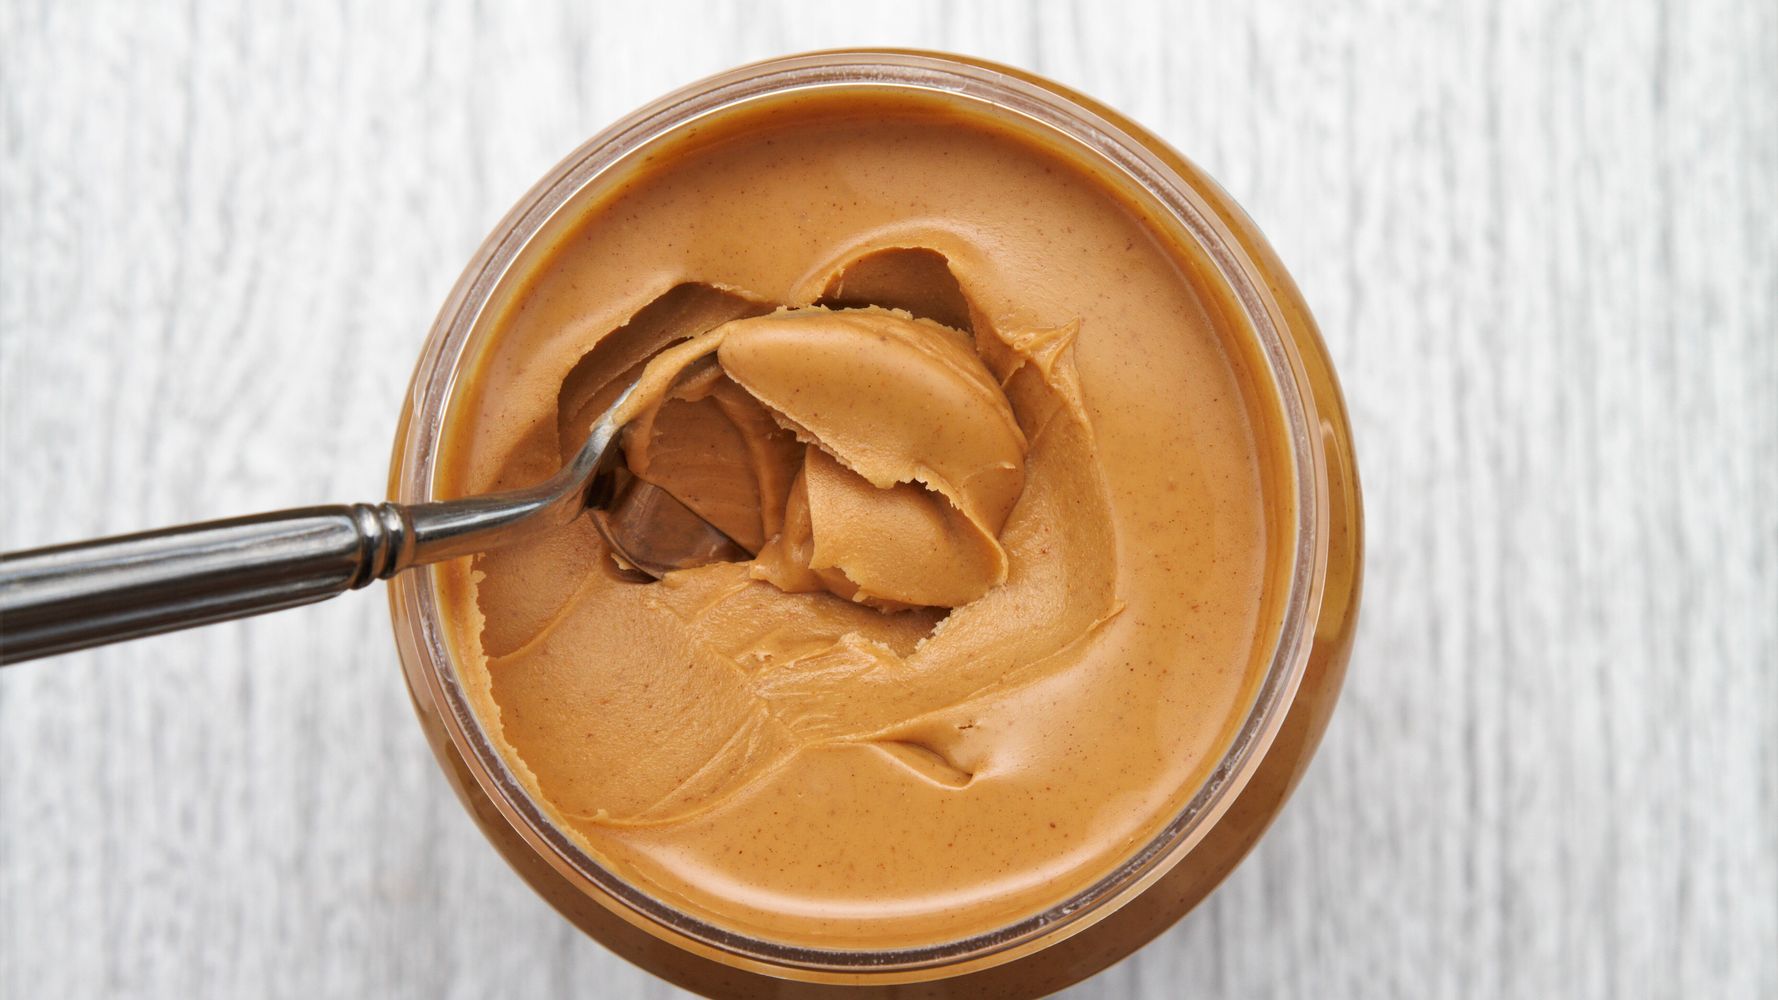 Do You Really Need To Refrigerate Nut Butter? photo